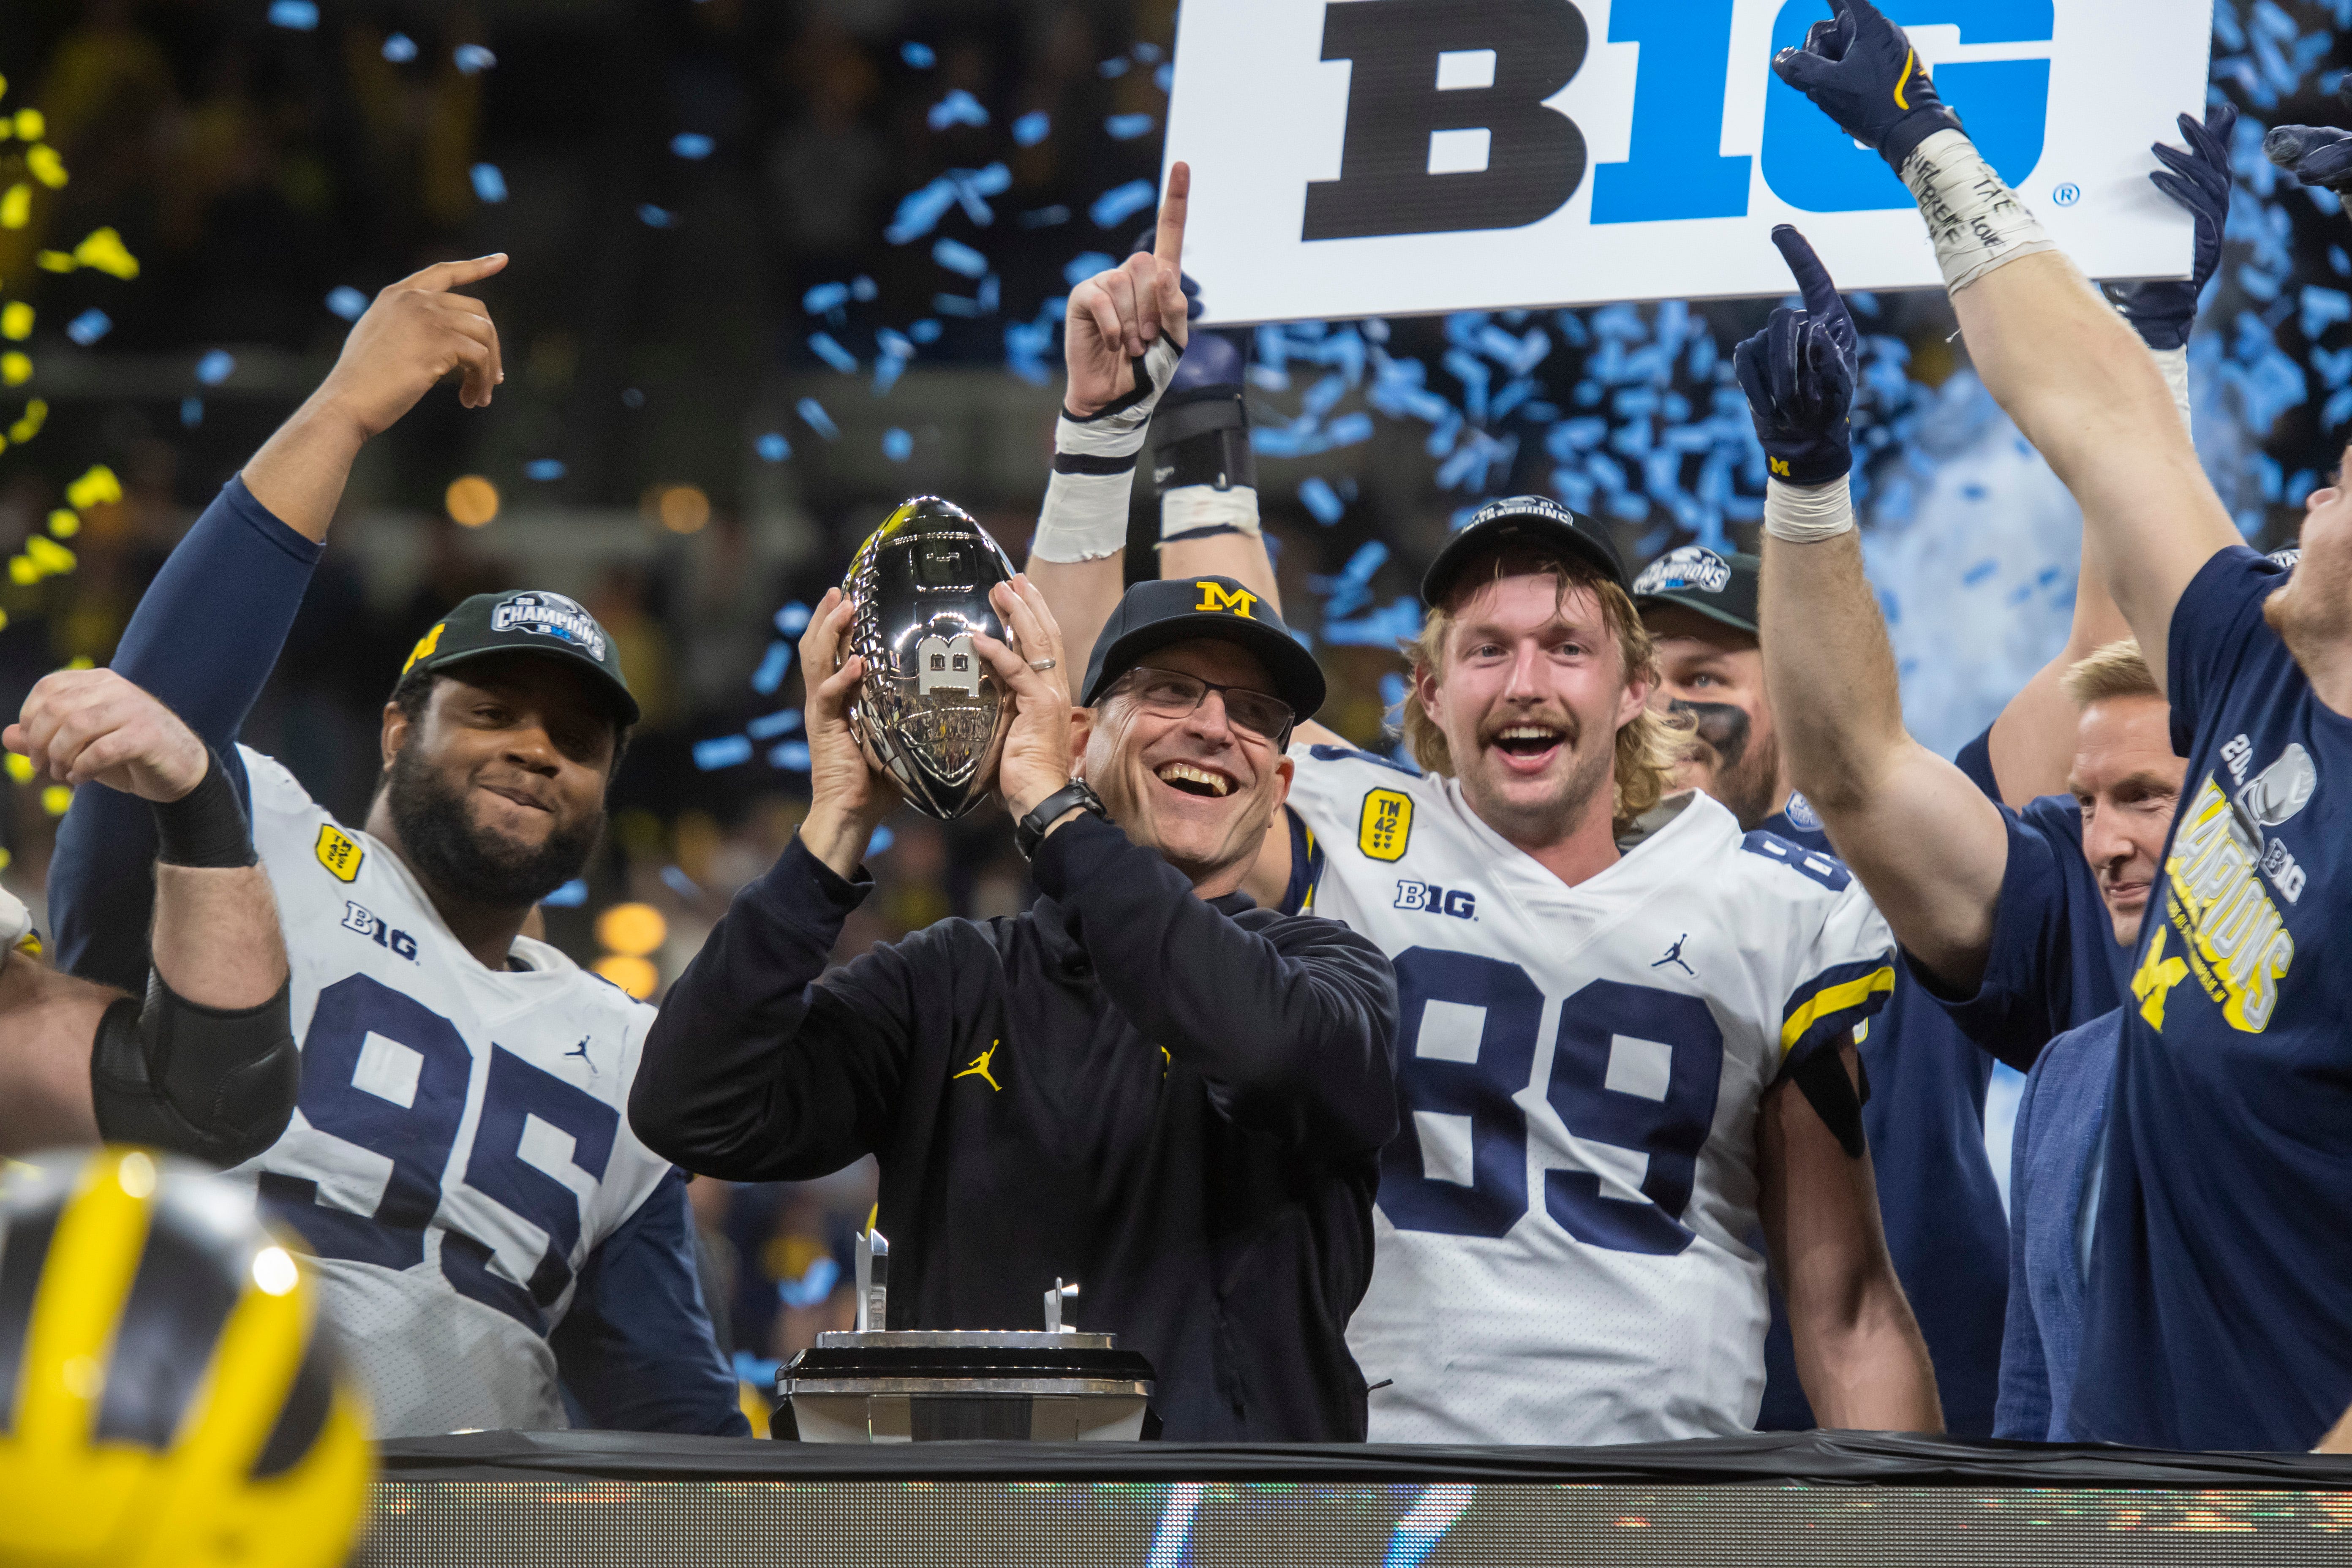 Head coach Jim Harbaugh holds up the championship trophy after the University of Michigan defeated the University of Iowa 42-3 to win the Big Ten championship at Lucas Oil Stadium in Indianapolis, December 5, 2021.